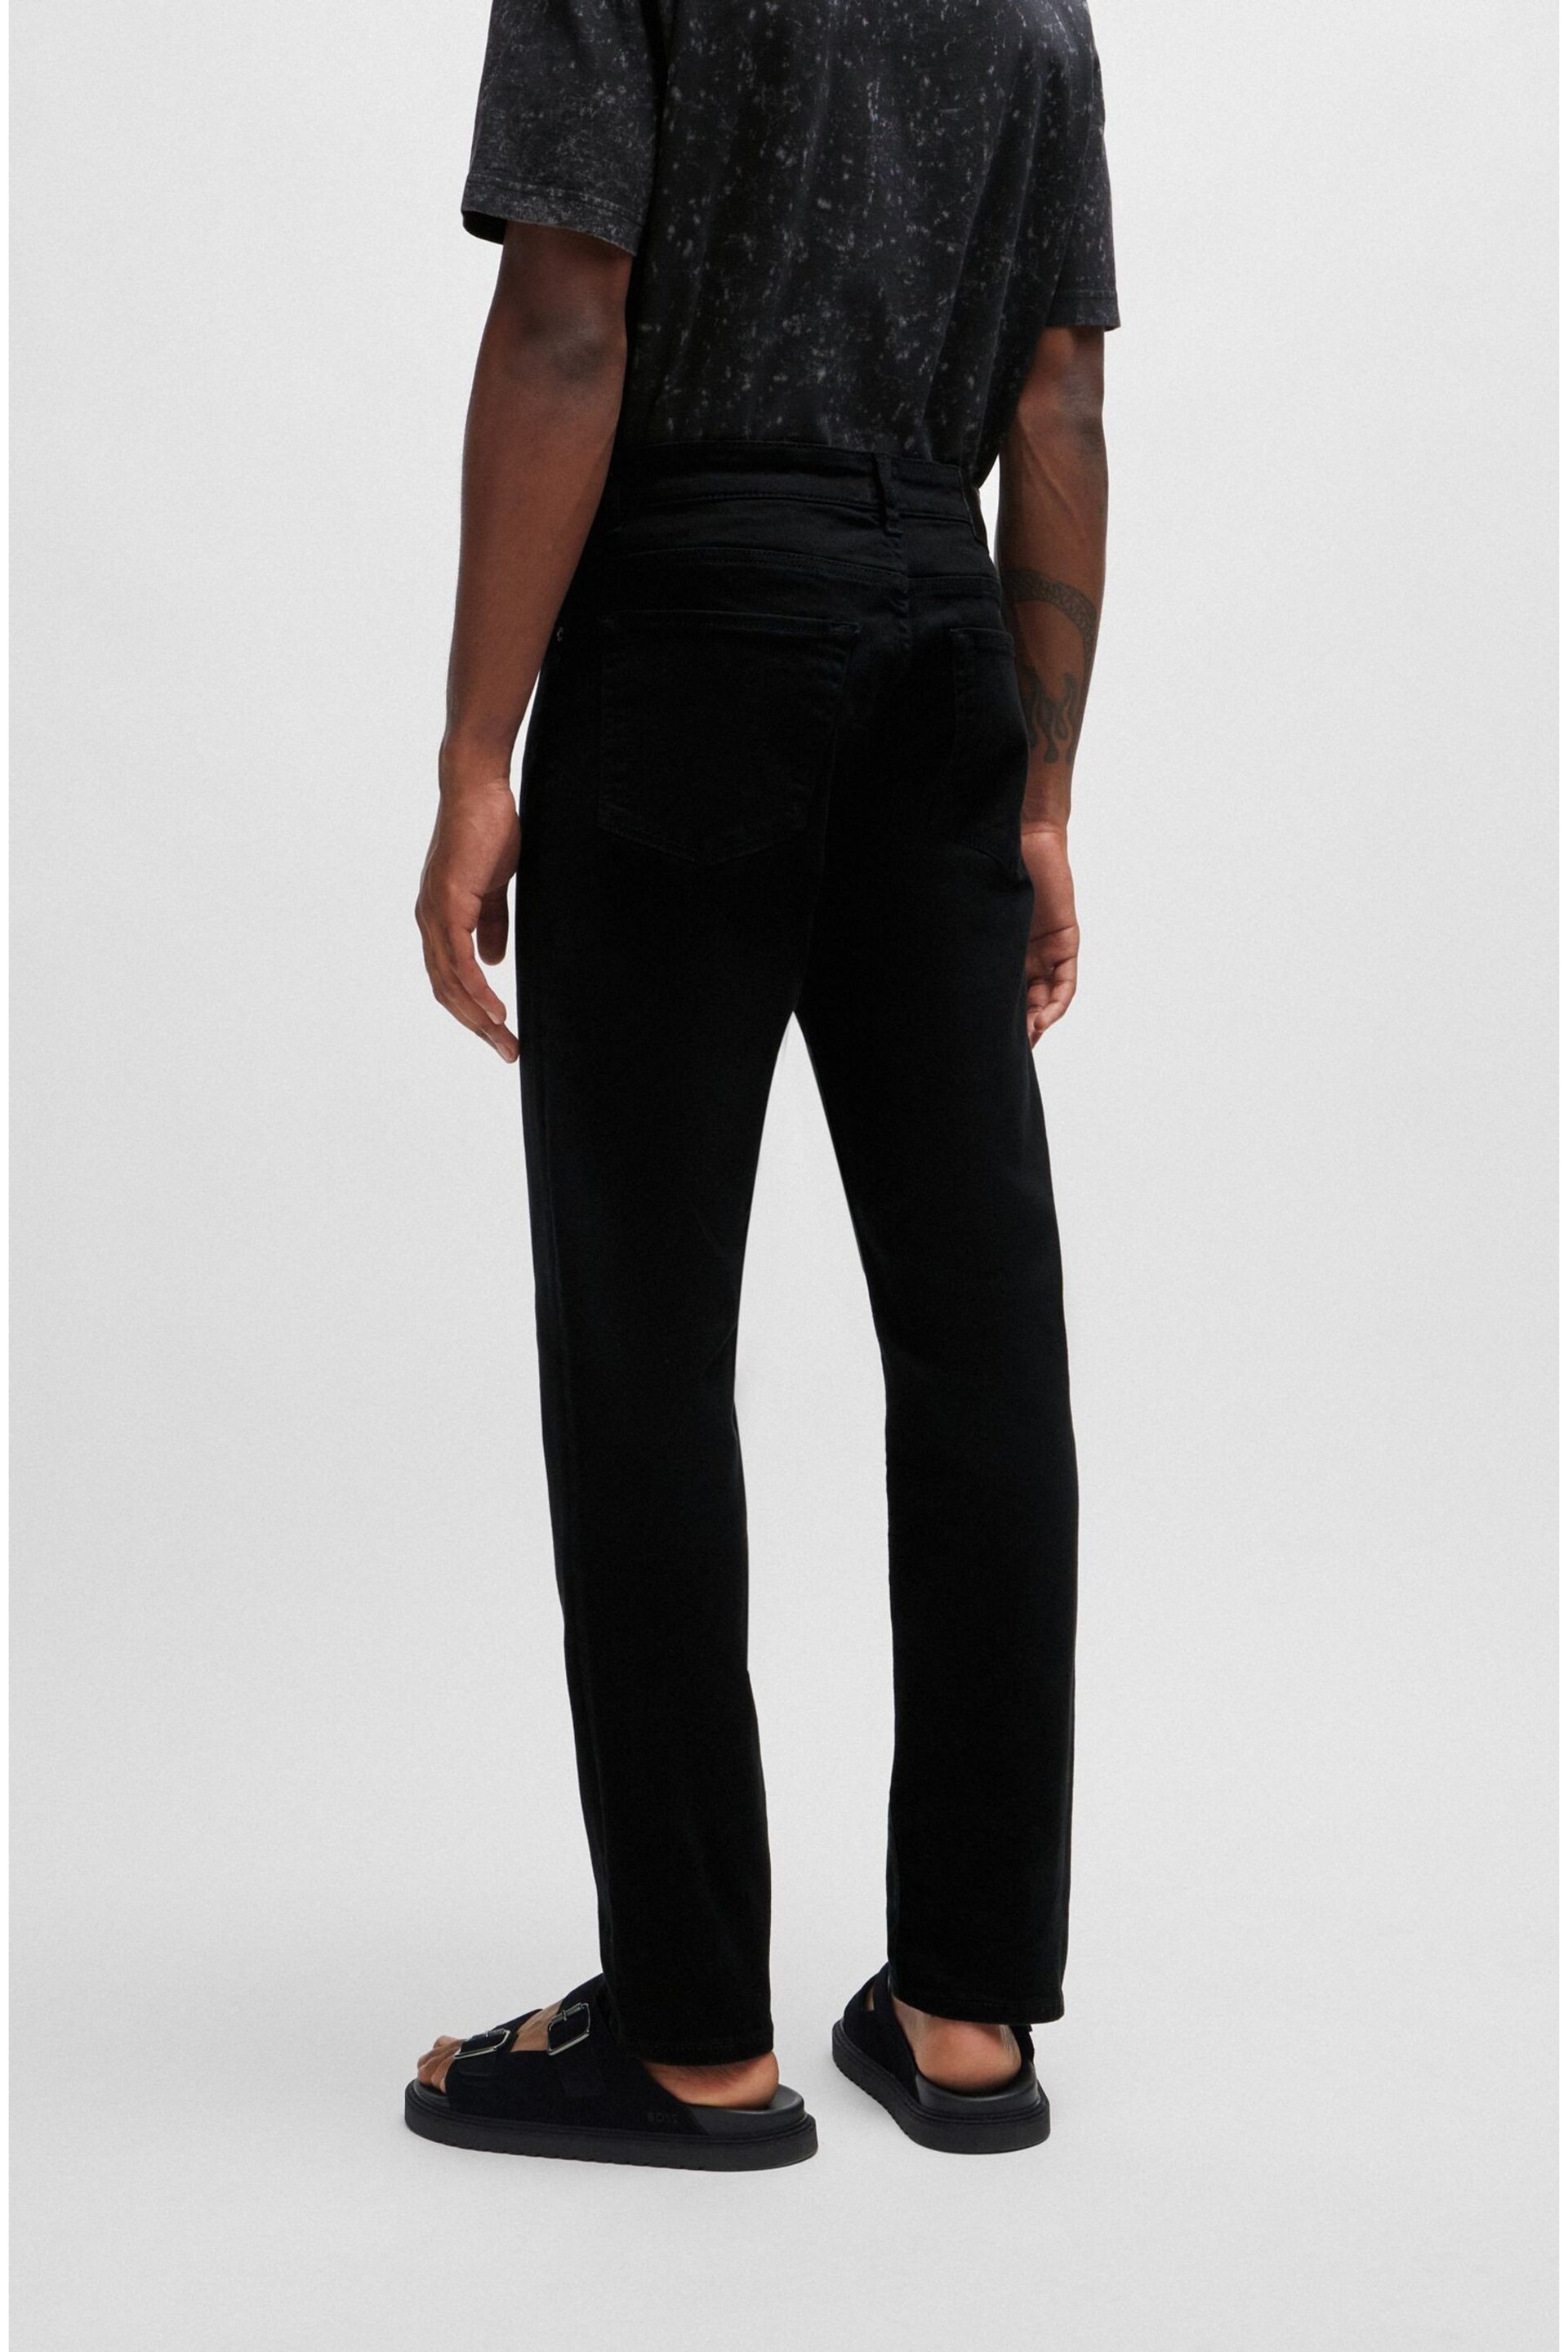 BOSS Black Wash Maine Straight Fit Stretch Jeans - Image 2 of 5